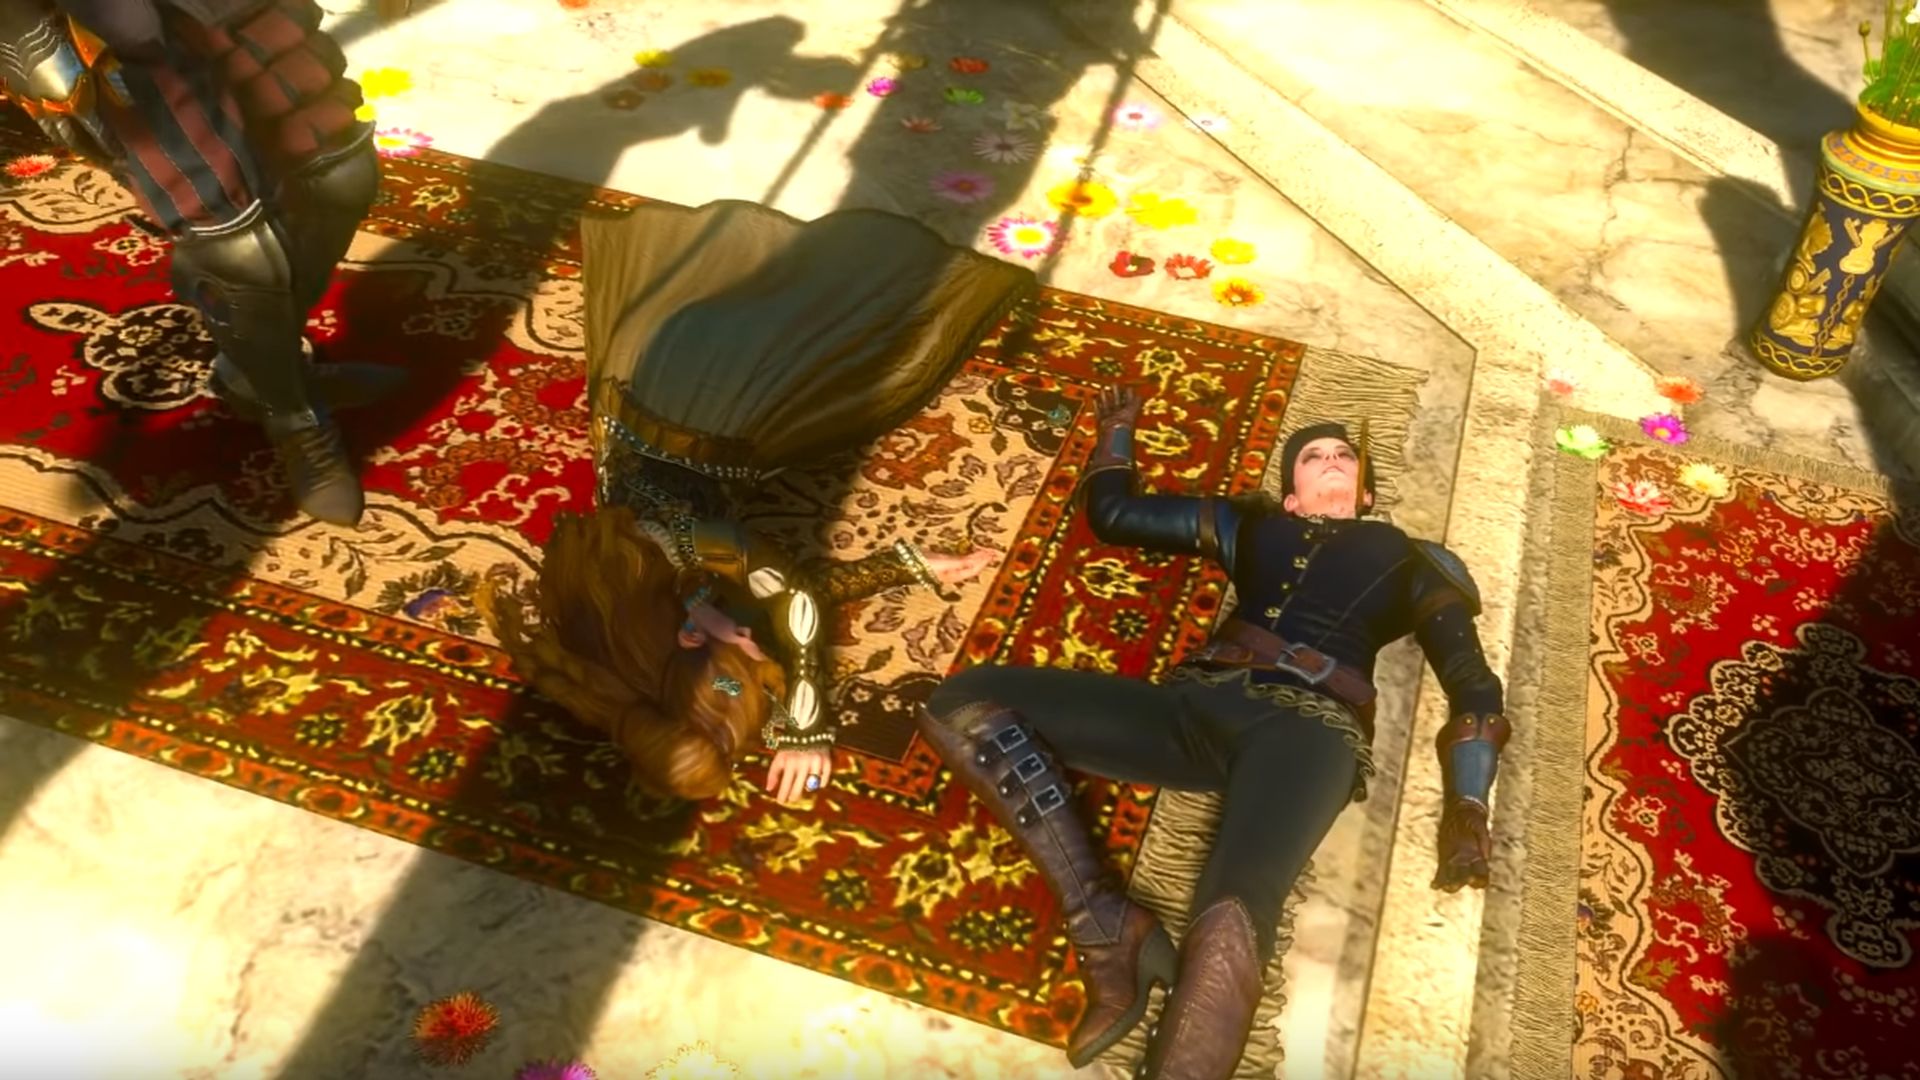 The duchess and syanna lie dead in the worst blood and wine Witcher 3 ending